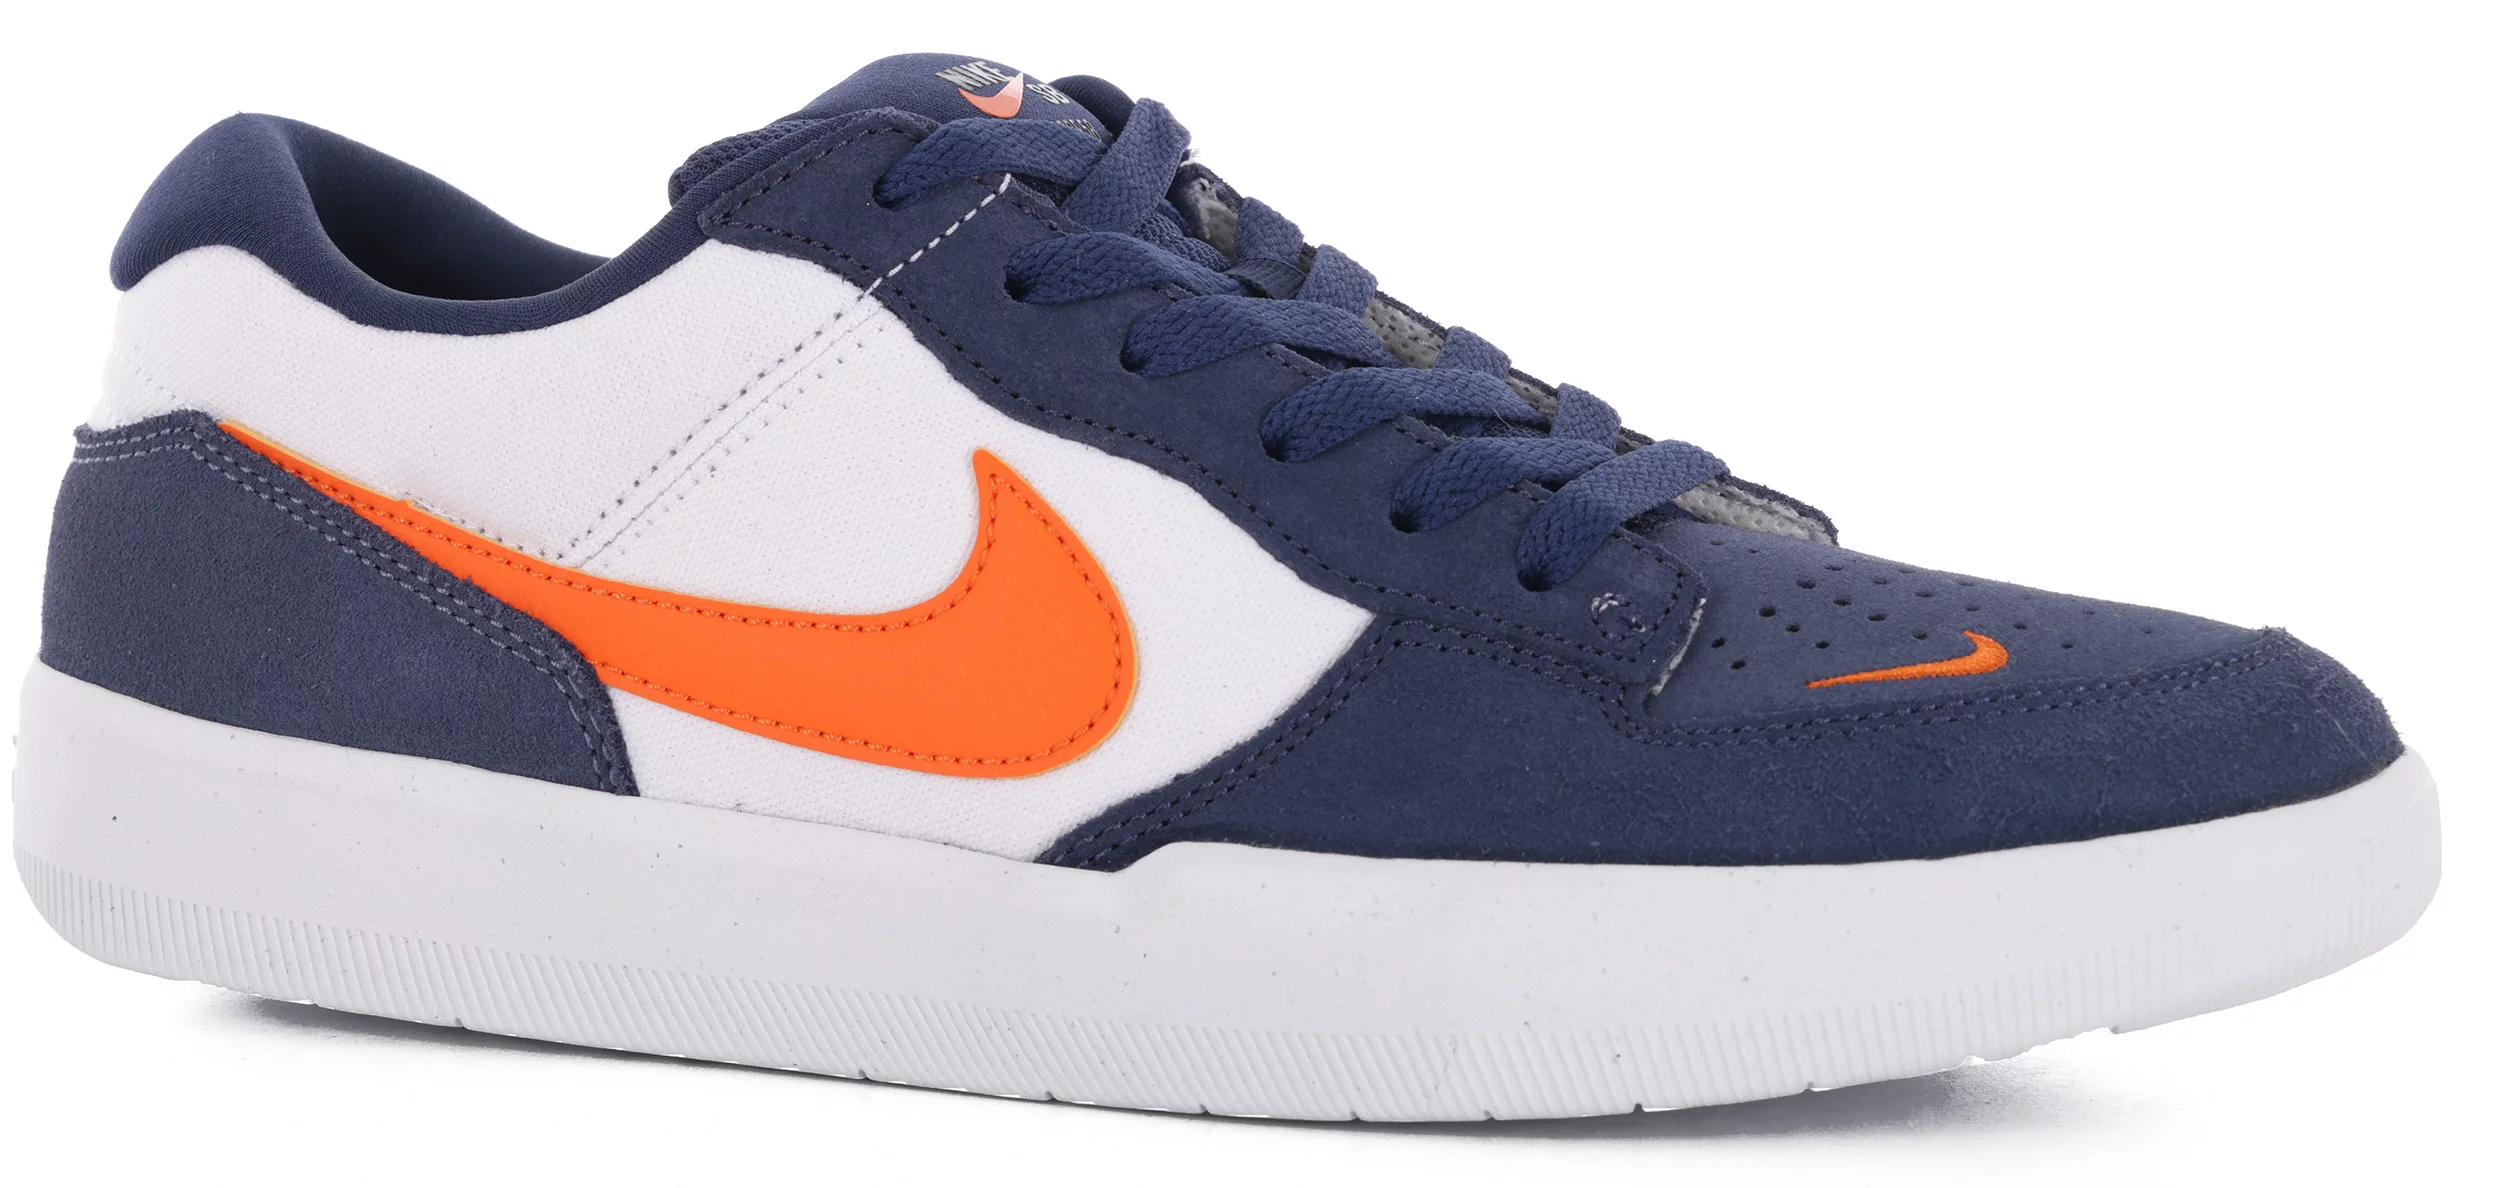 Justitie speelgoed overschreden Nike SB Force 58 Skate Shoes - midnight navy/safety orange-white - Free  Shipping | Tactics